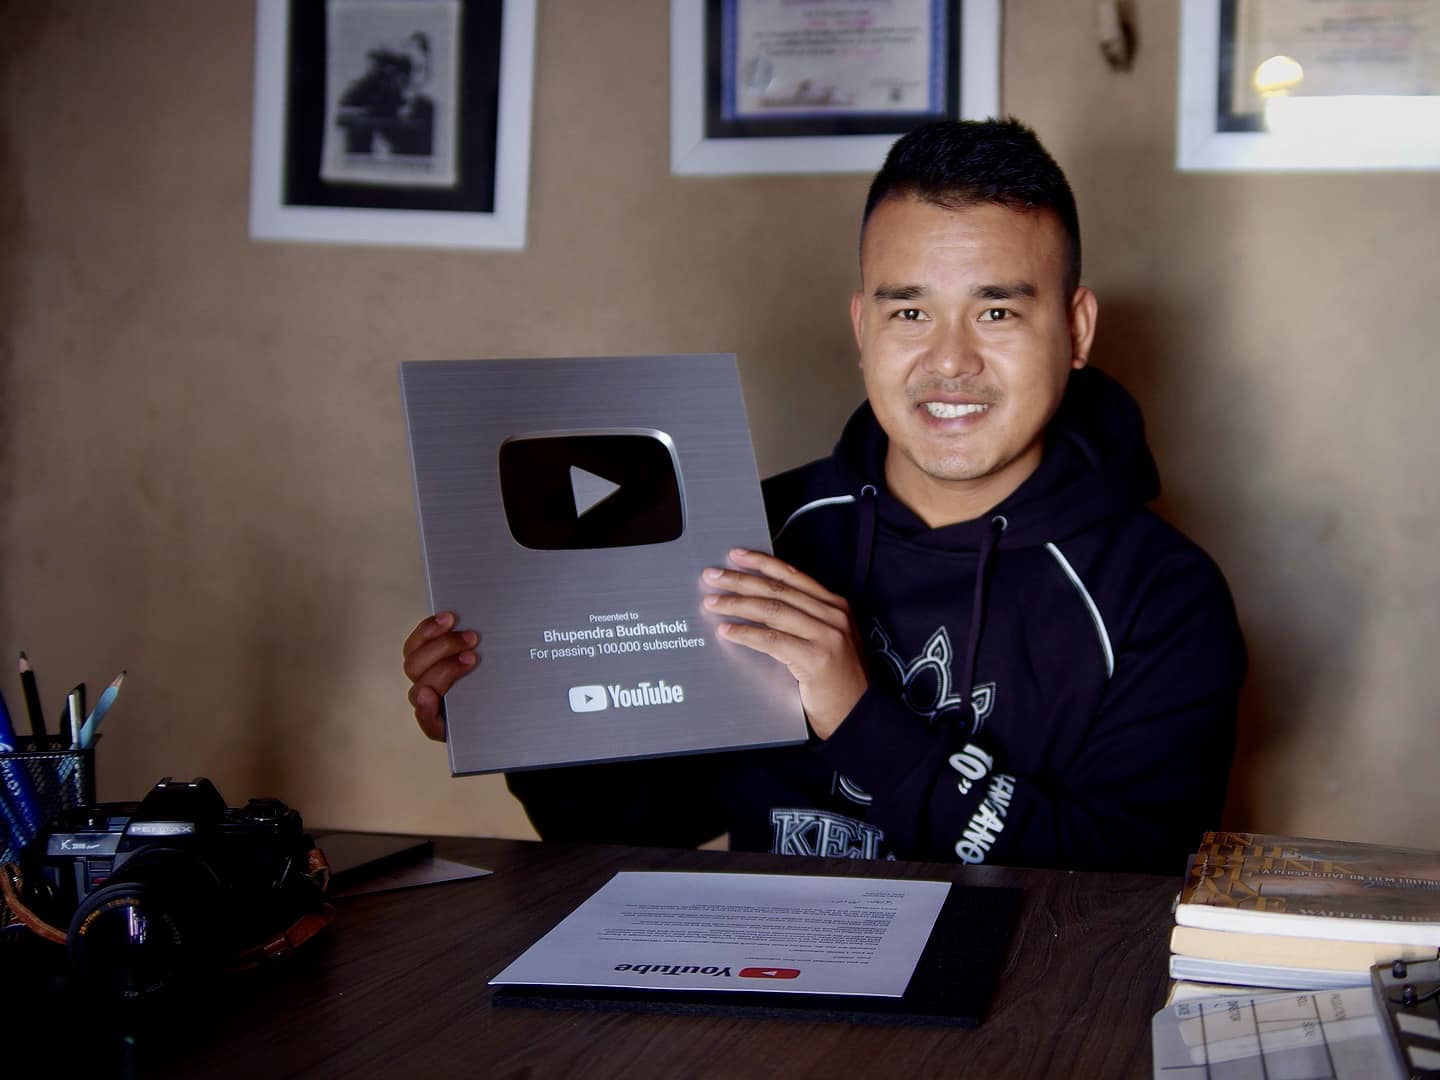 Budhathoki becomes first police officer to receive silver play button